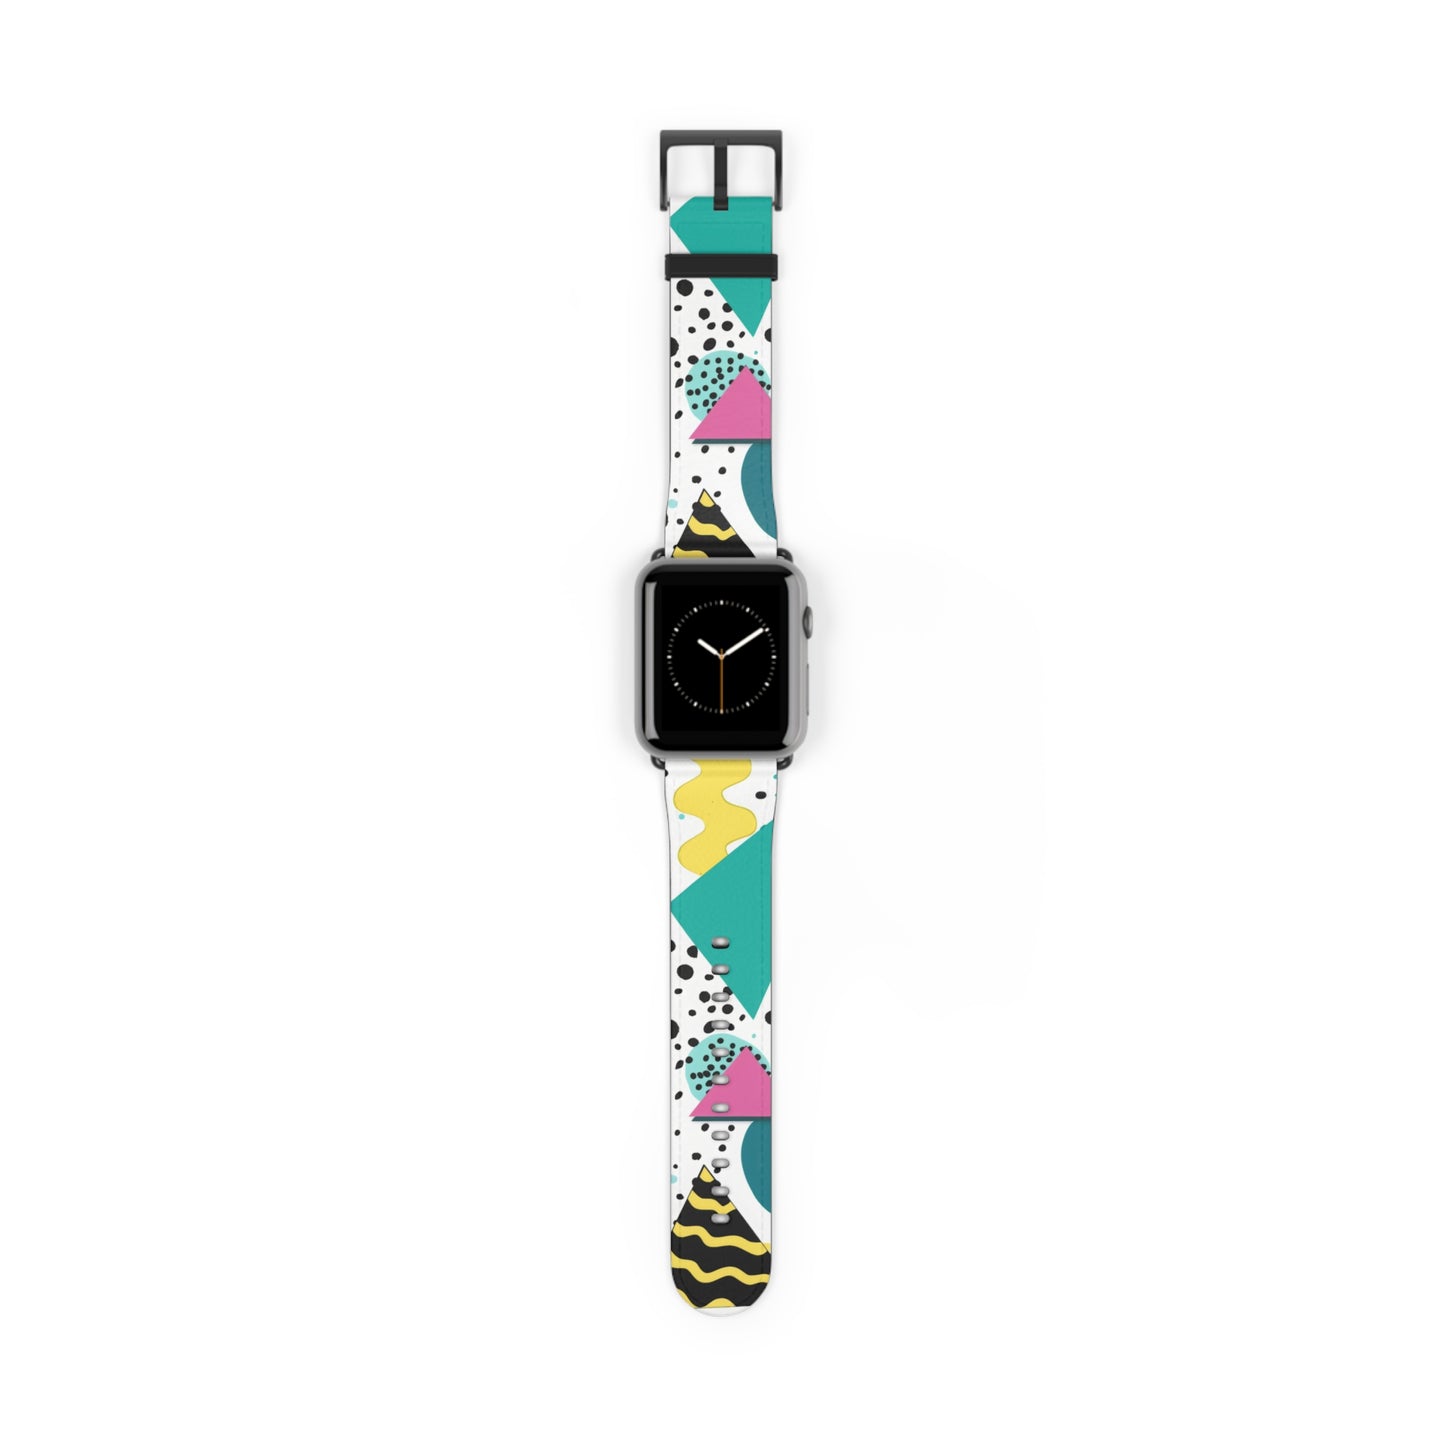 Funky Geometric Apple Watch Band | Colorful Abstract Pattern, Stylish Watch Strap for Daily Wear, Unique Accessory Gift. Apple Watch Band Apple Watch Straps For Series 4 5 6 7 8 9 SE 38/40/41mm & 42/44/45mm Vegan Faux Leather Band